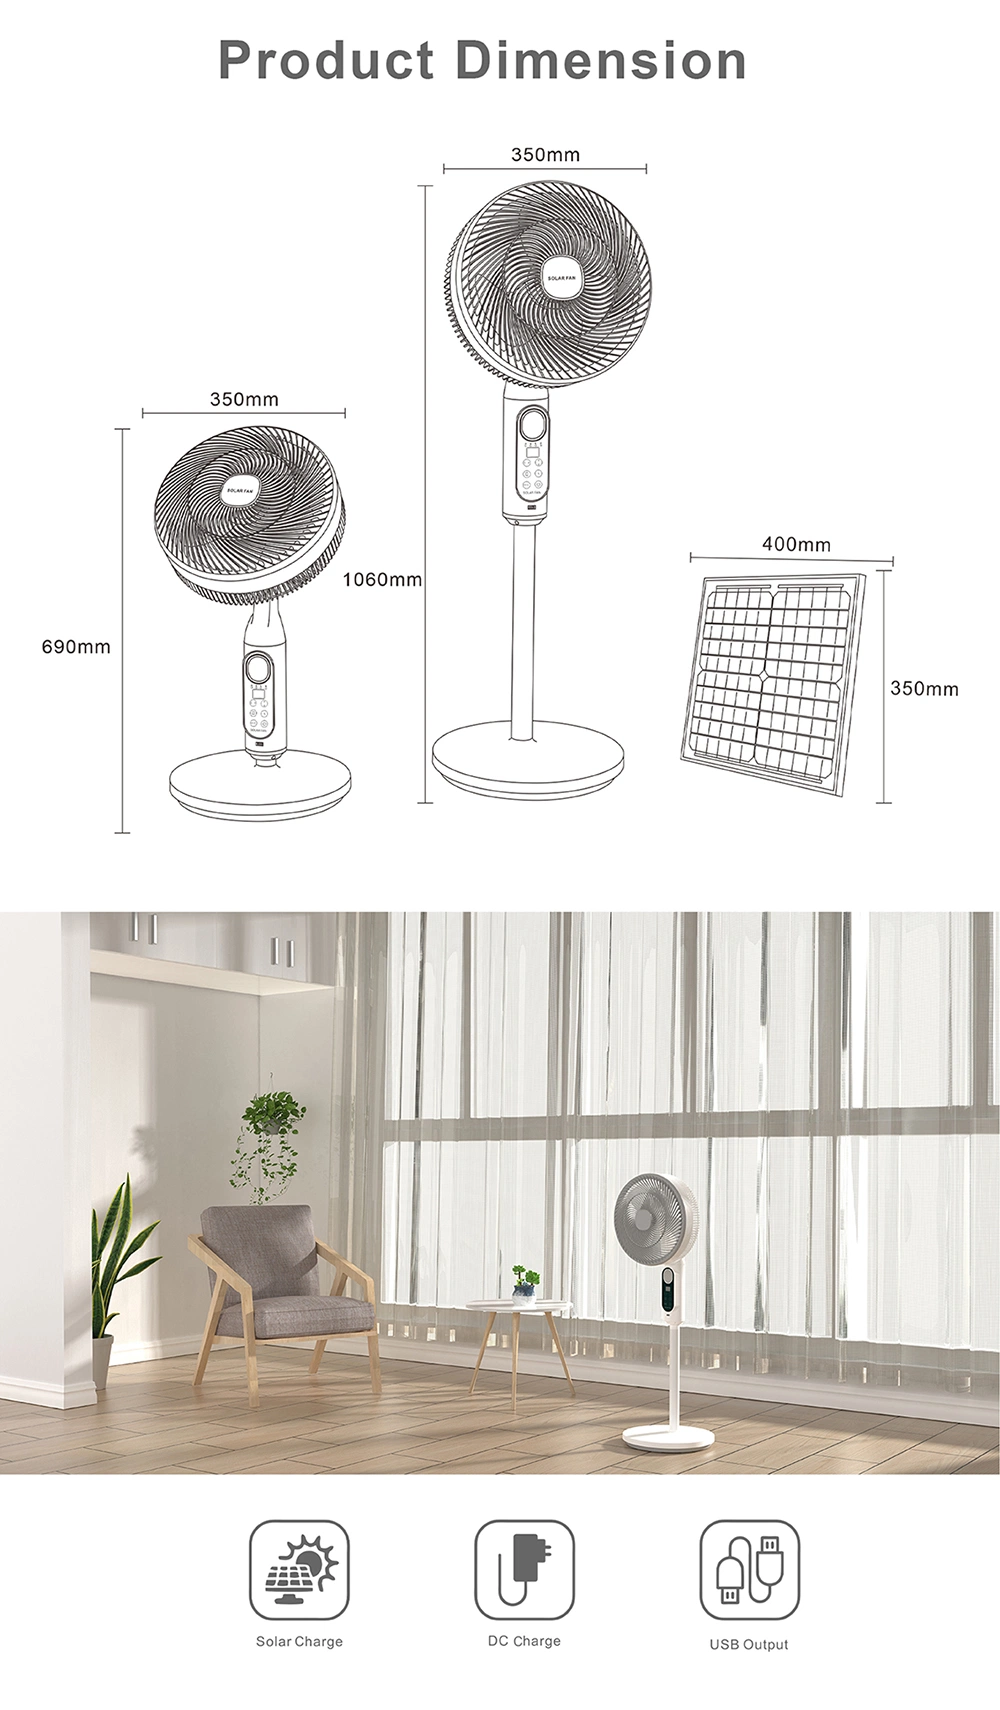 Air Circulator 360 Degree Circulation Fan, Evaporative Air Cooler and Tower Fan, Oscillating Bladeless USB Cooling Fan Household Cooling Fan